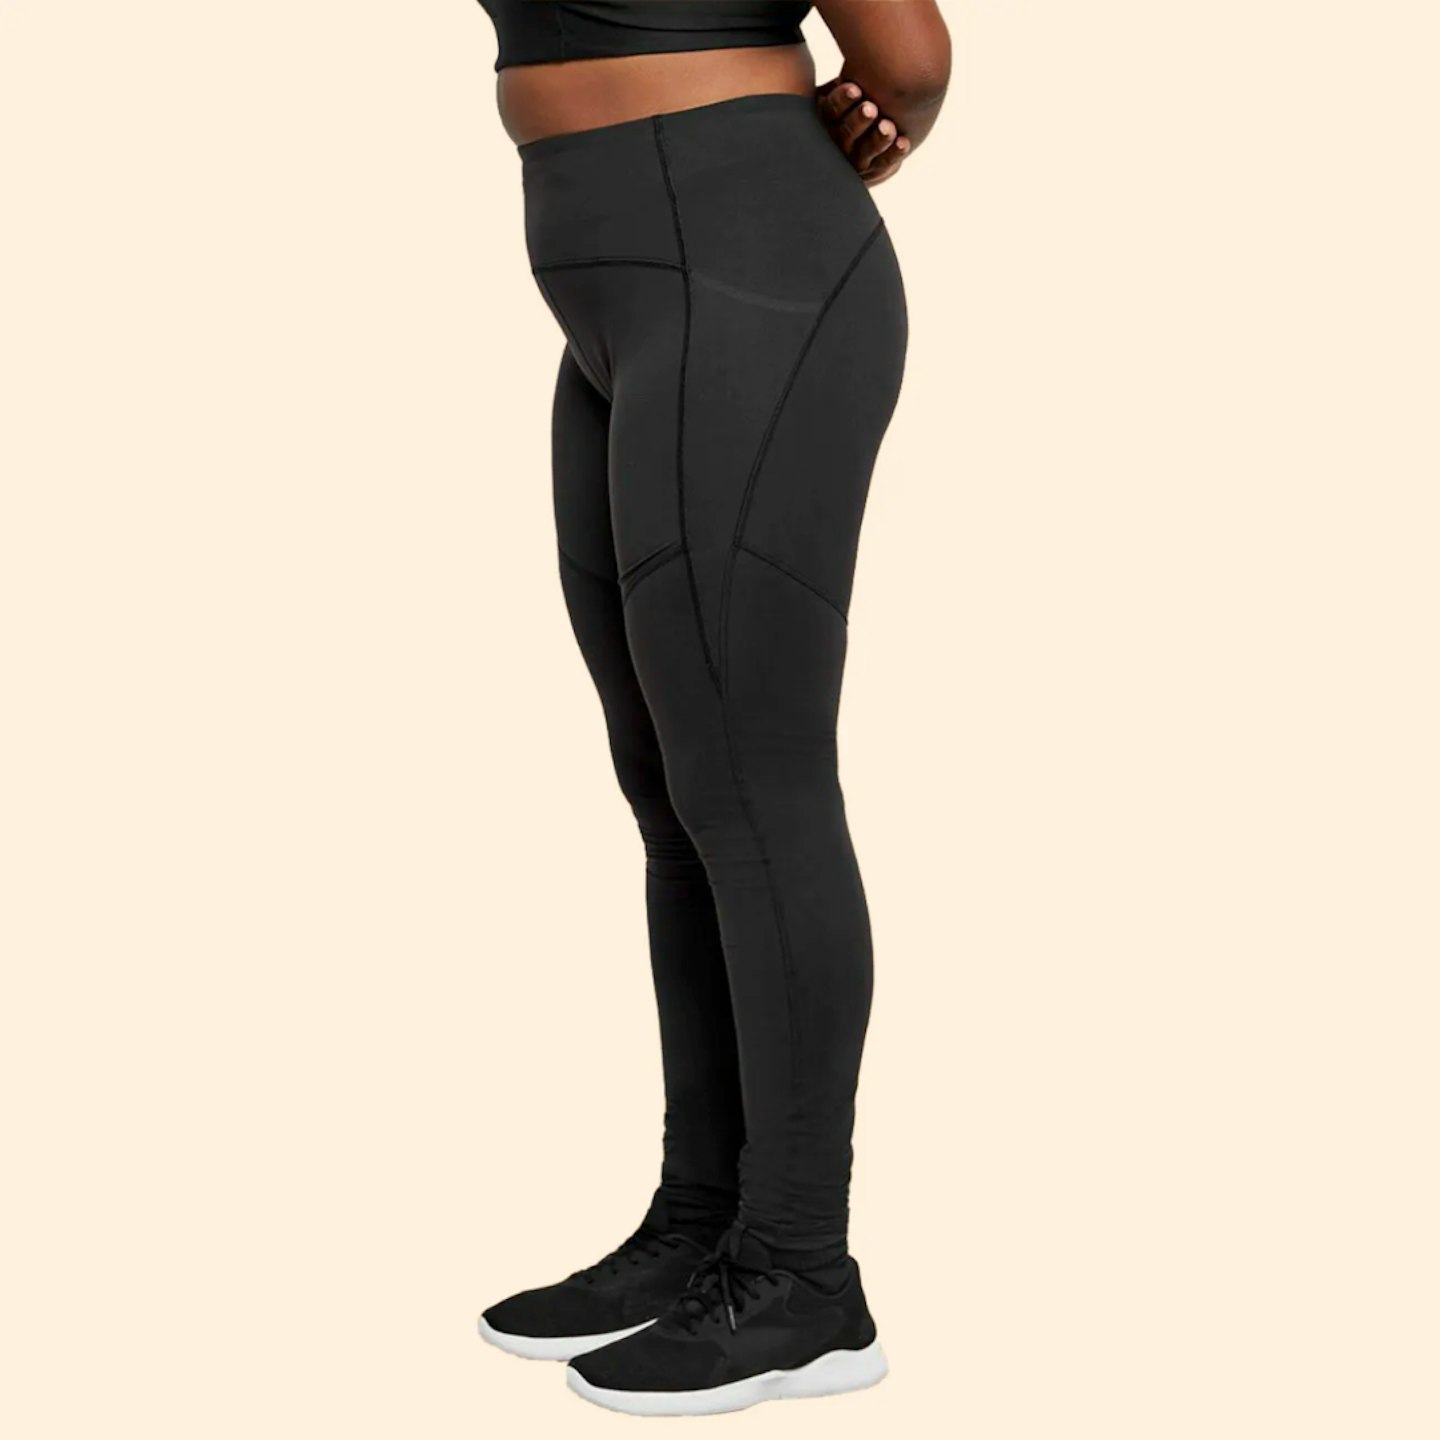 Modibodi period leggings review: Do they live up to the hype